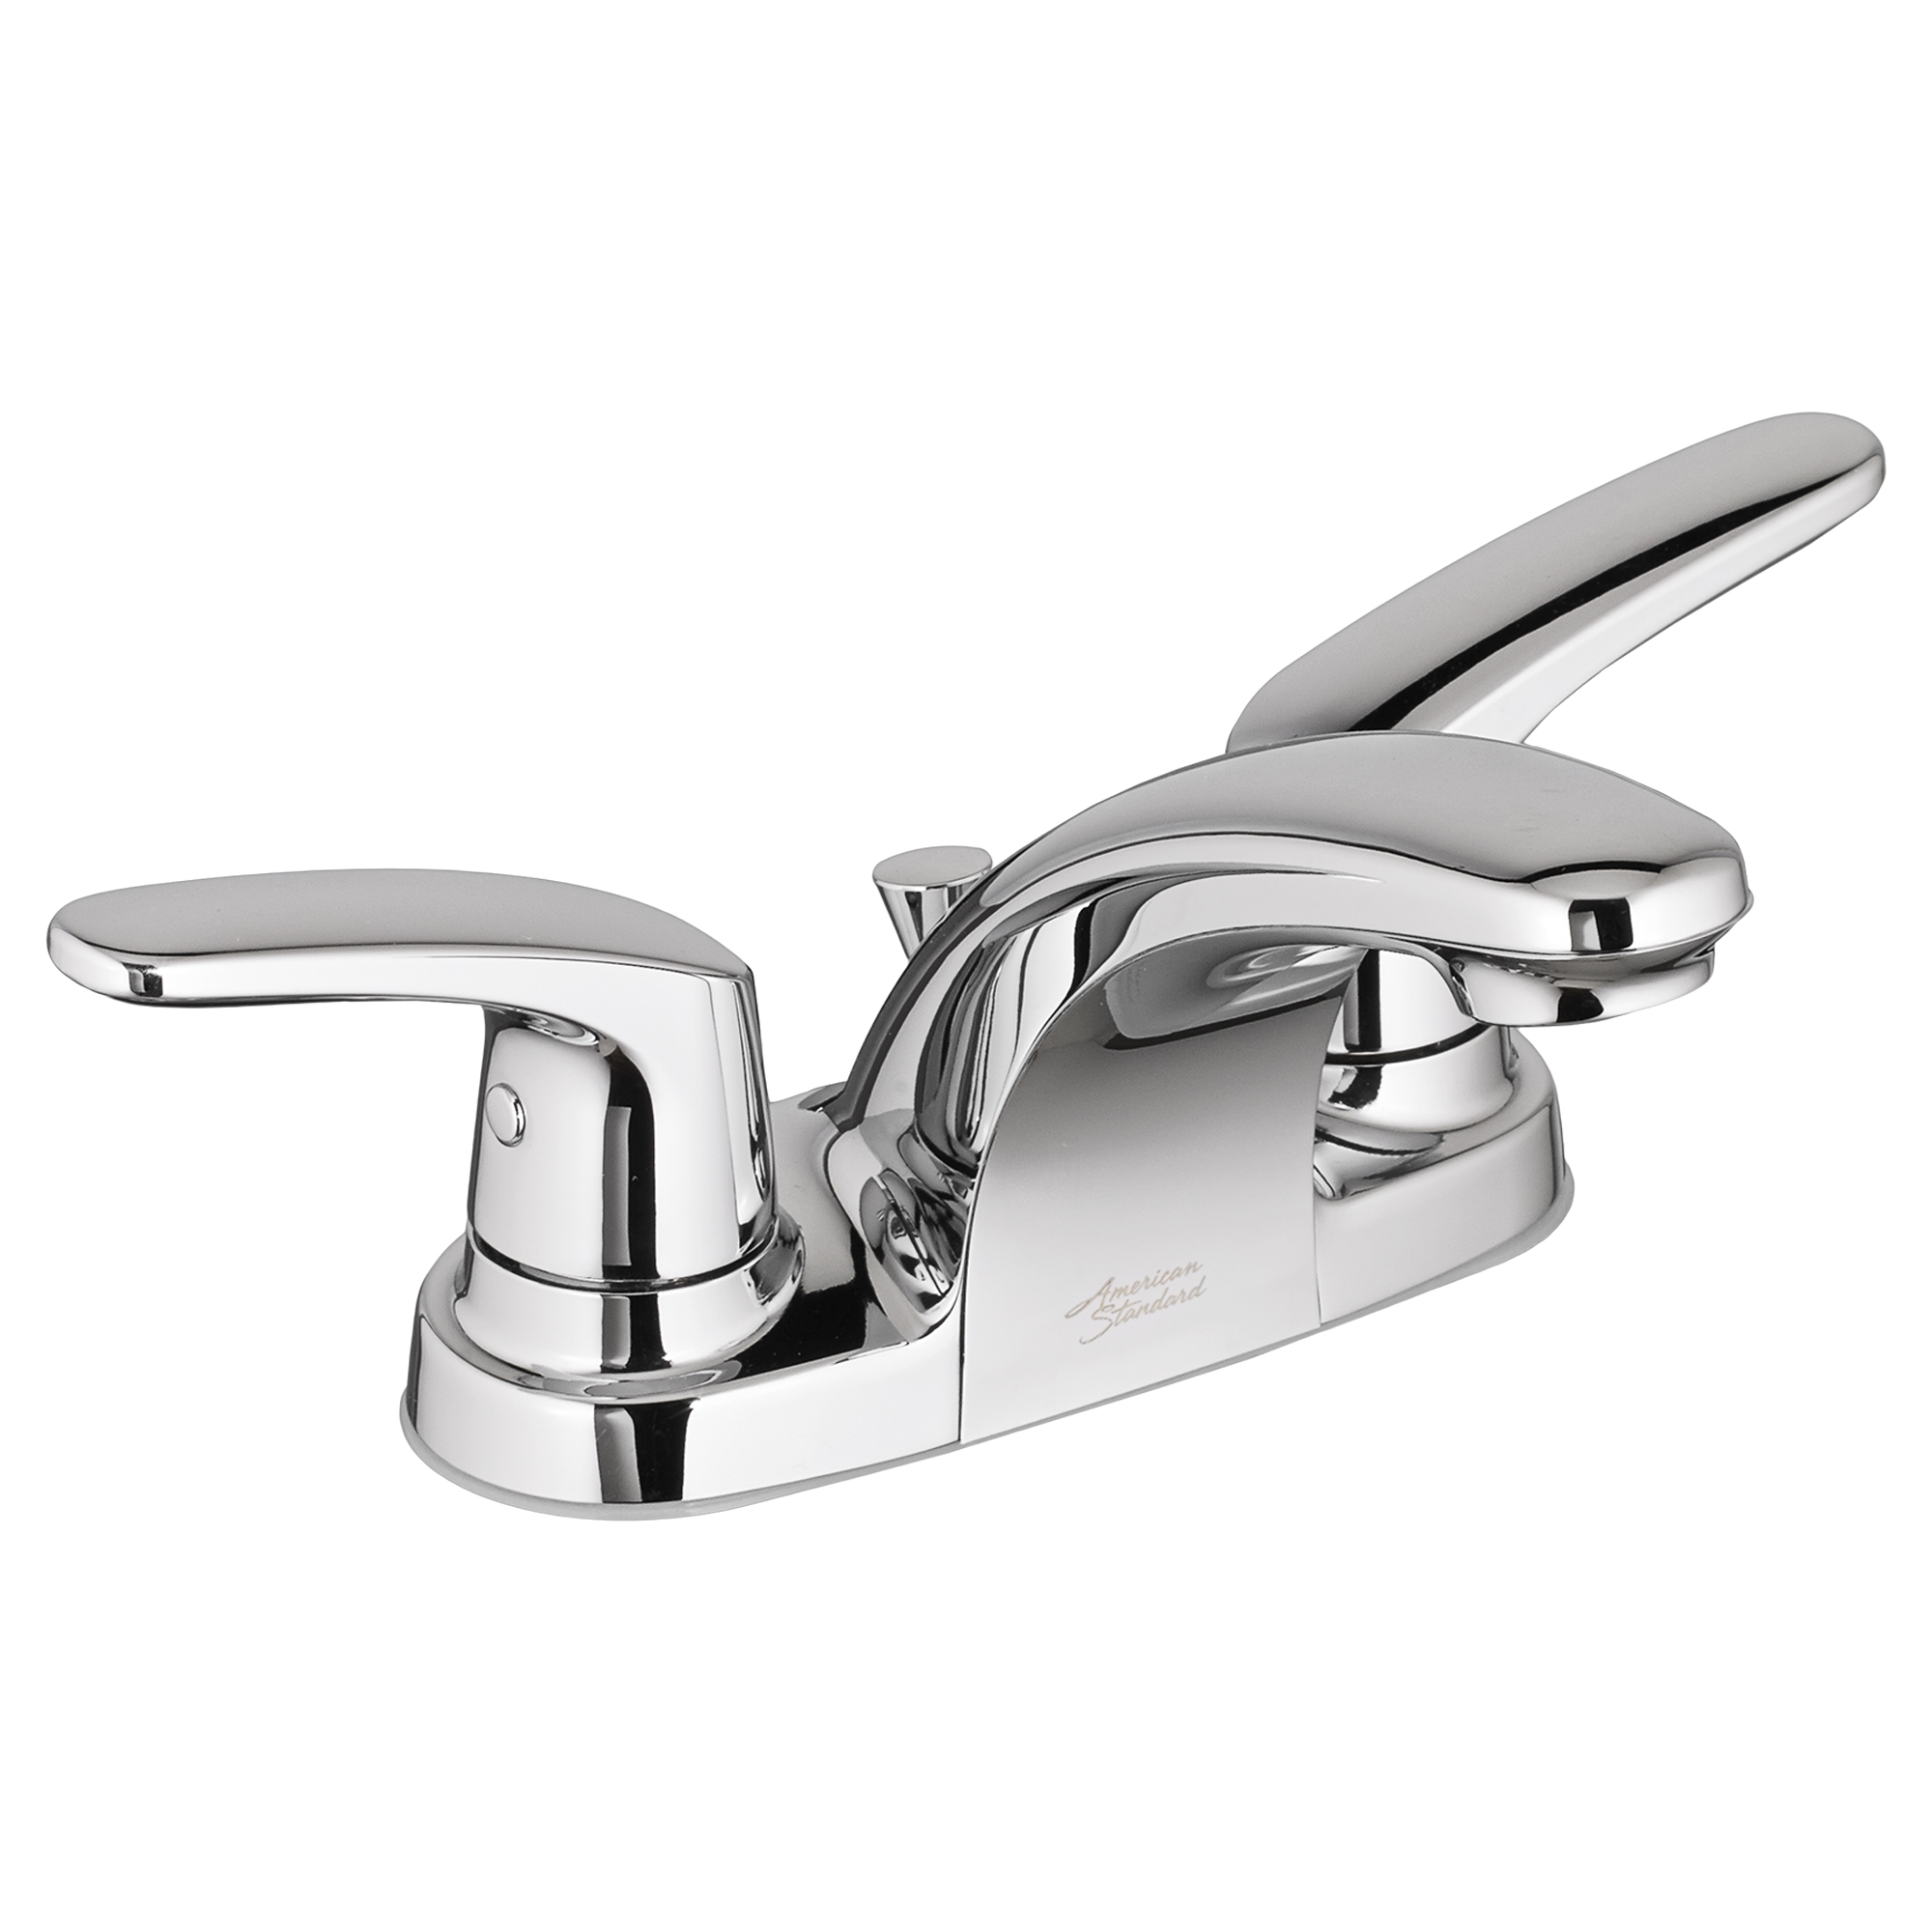 Colony® PRO 4-Inch Centerset 2-Handle Bathroom Faucet 1.0 gpm/3.8 Lpm With Lever Handles